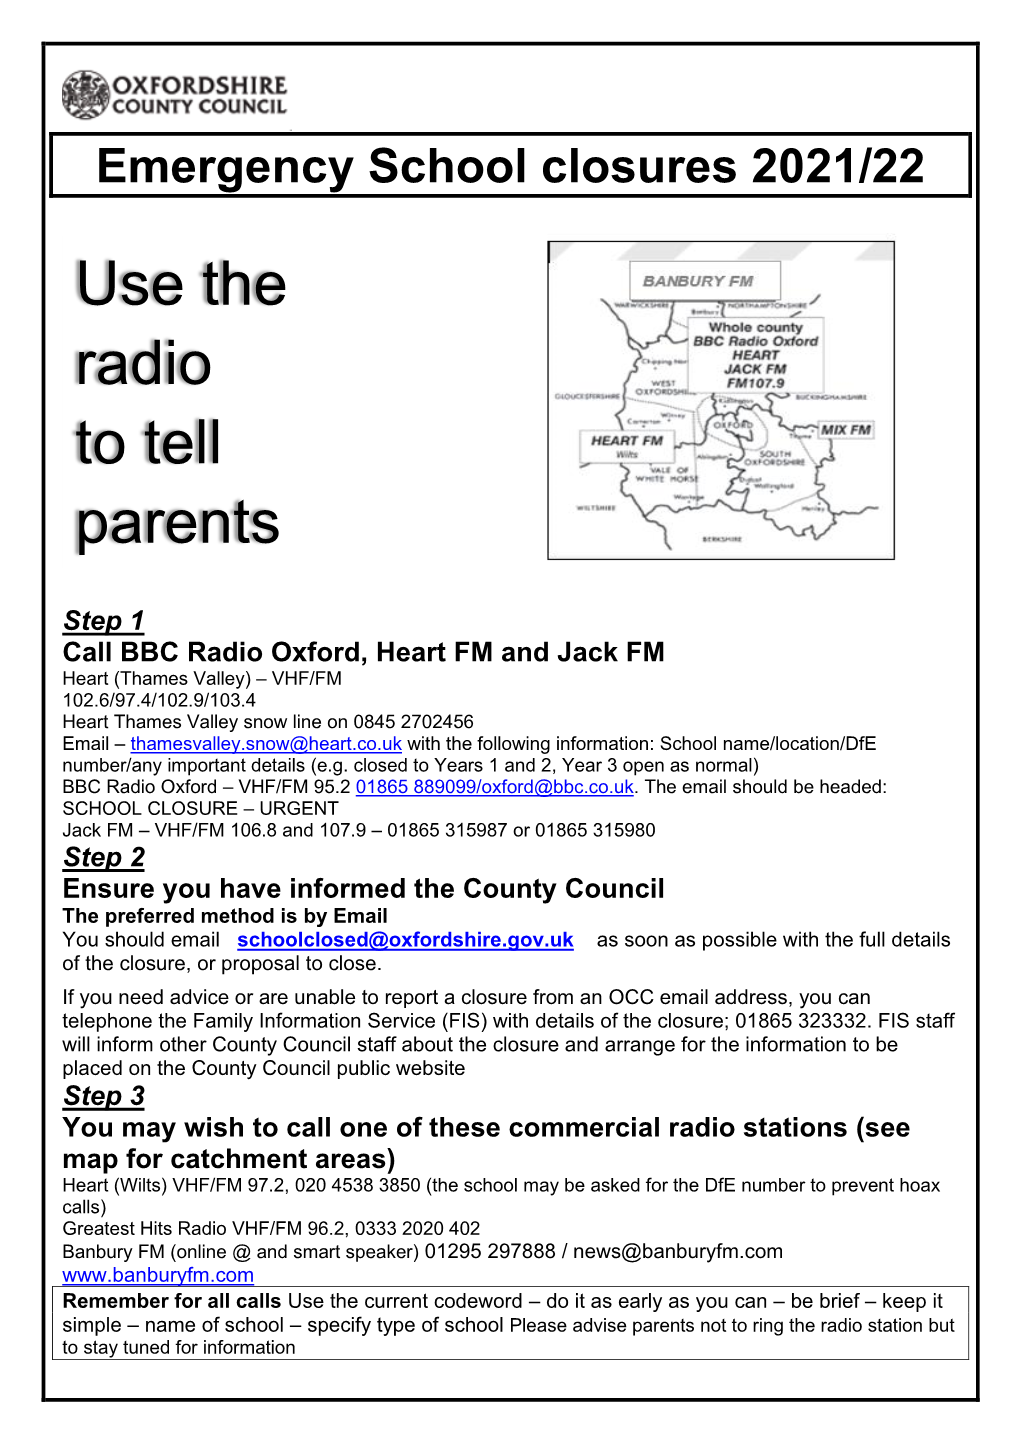 Use the Radio to Tell Parents